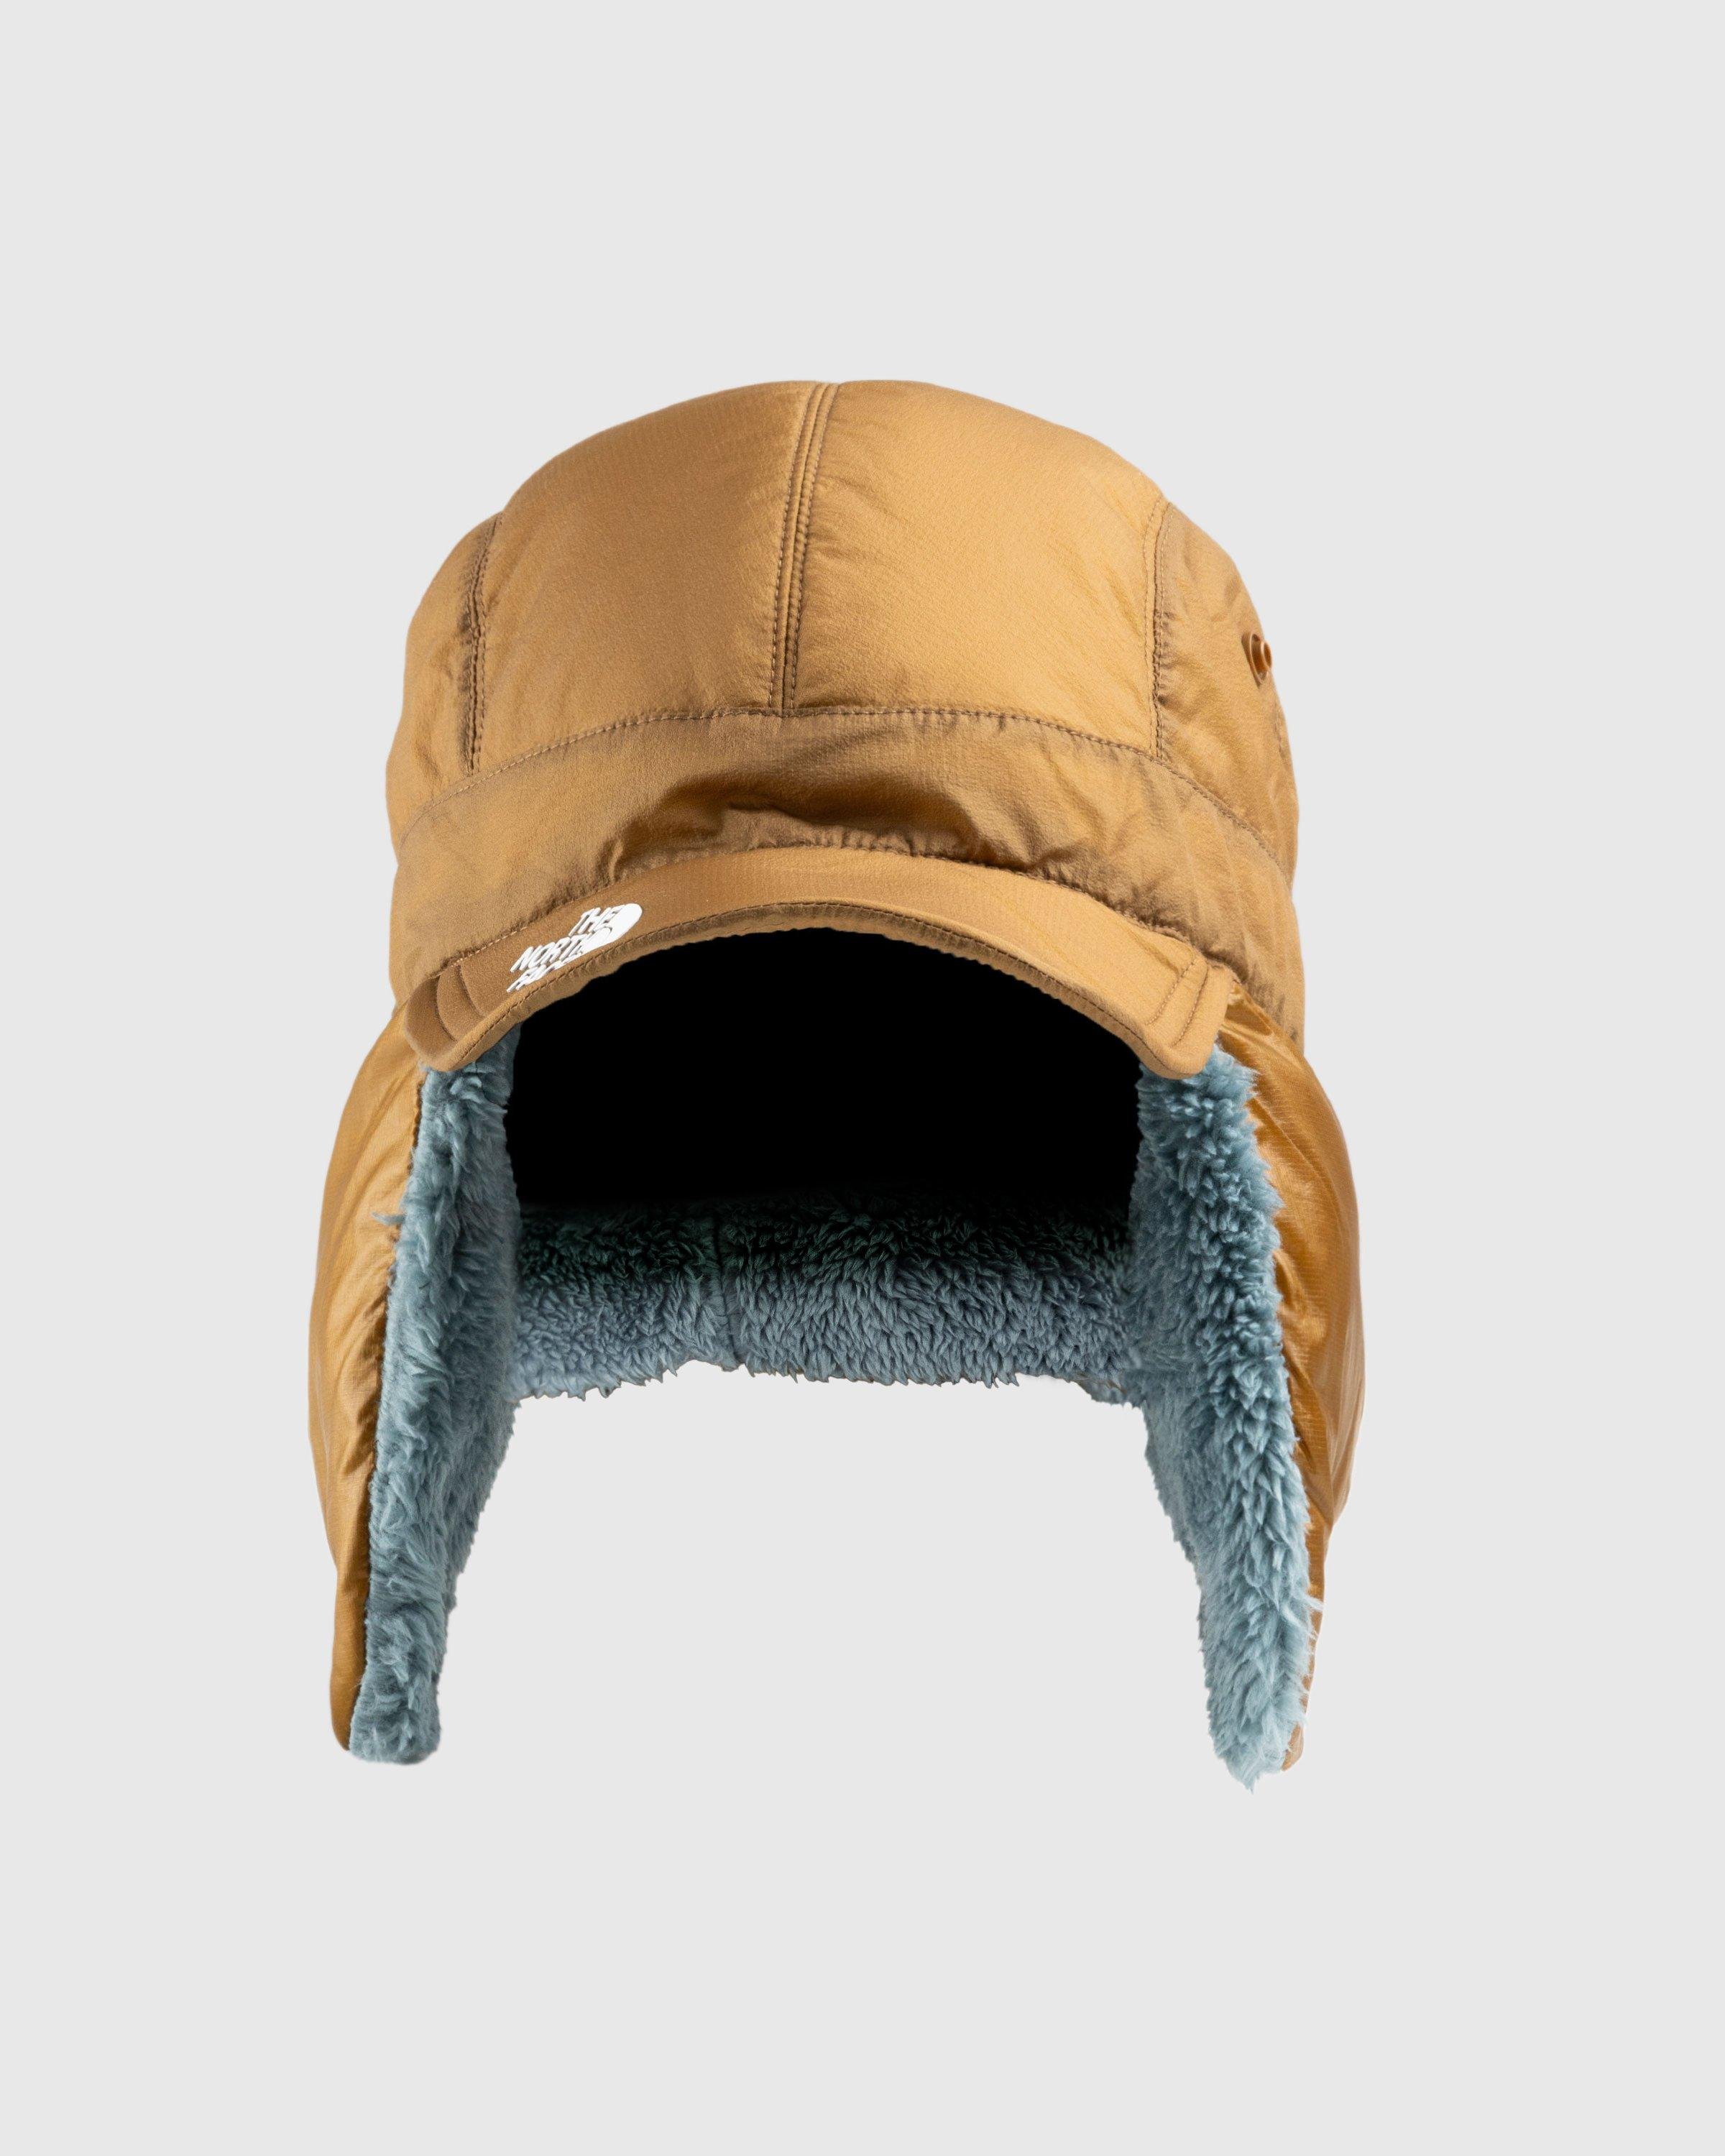 The North Face x UNDERCOVERSoukuu Down Cap Bronze Brown/Concrete Gray by HIGHSNOBIETY